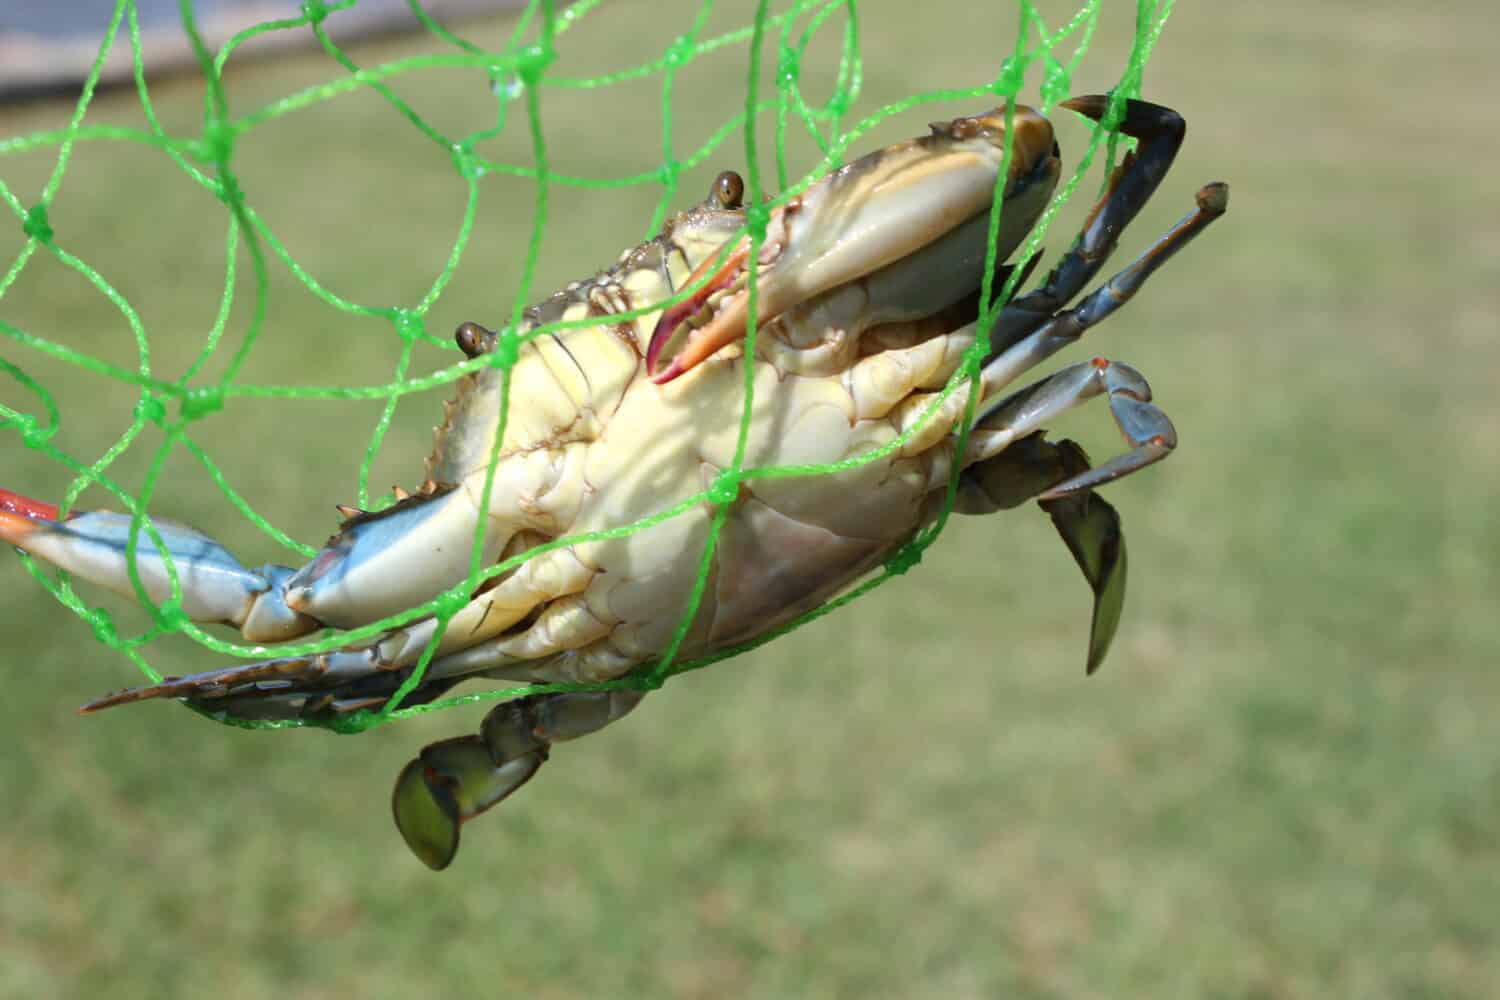 Chesapeake Bay Blue crab caught in the net